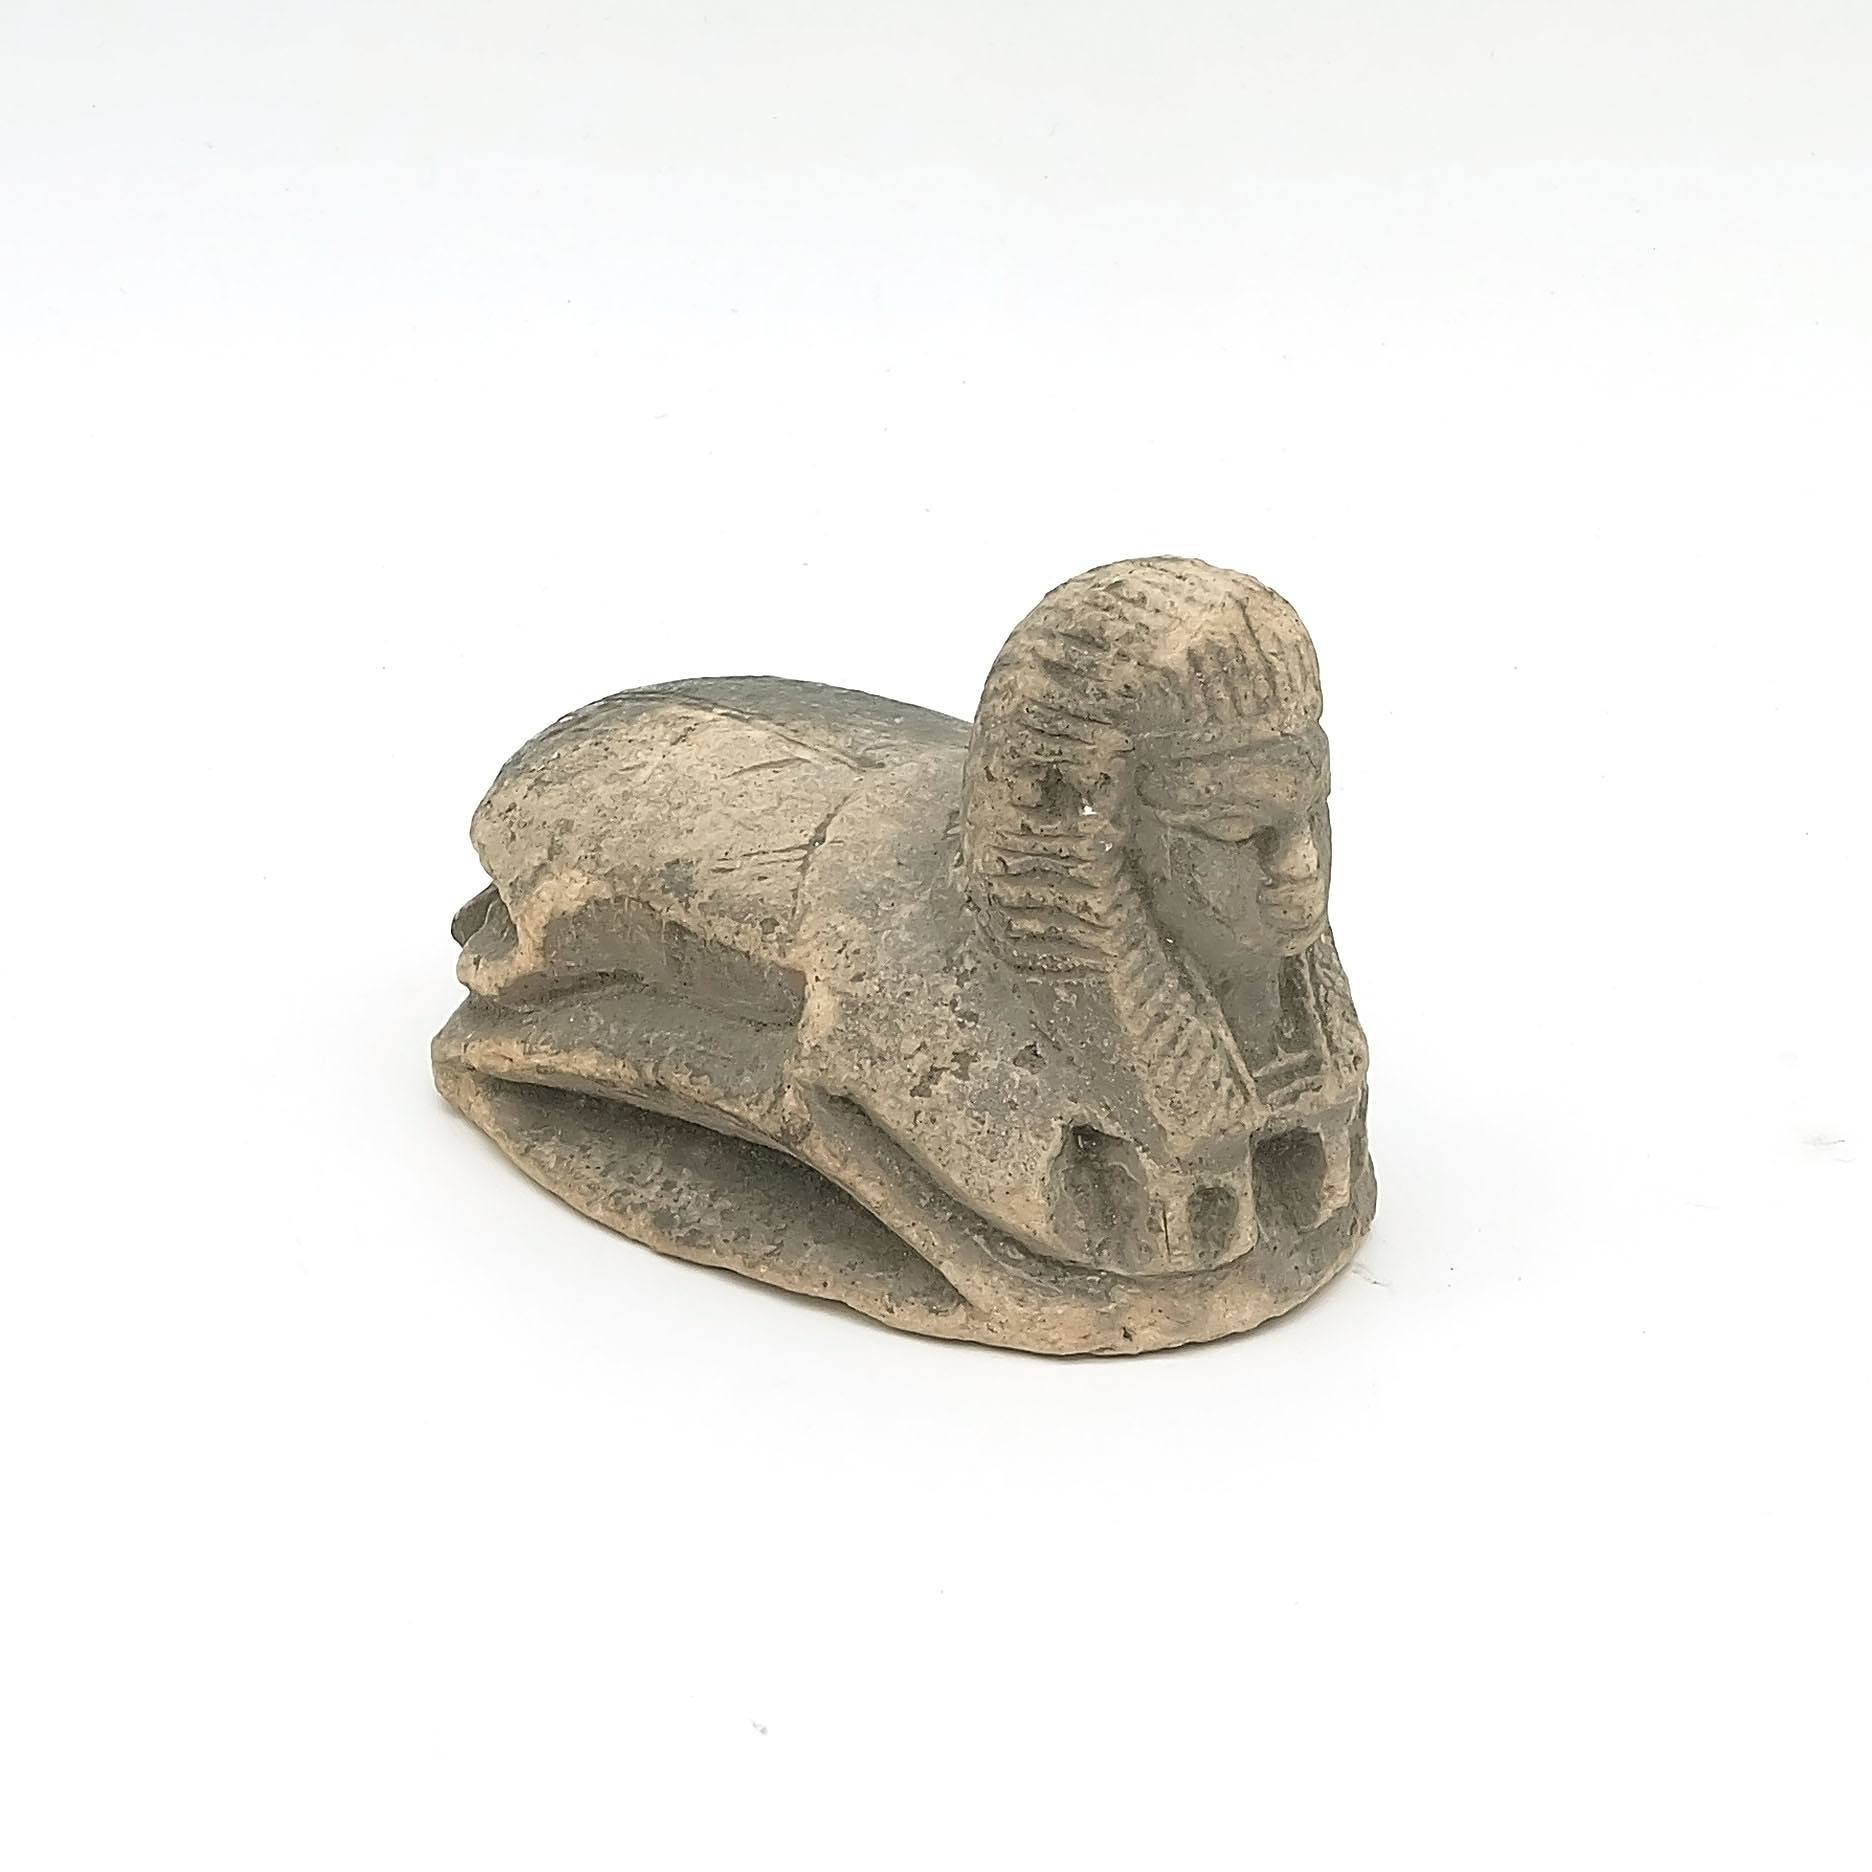 'Egyptian Carved Stone Scarab Sphinx with Hieroglyphs, Grand Tour Period Early 20th Century'